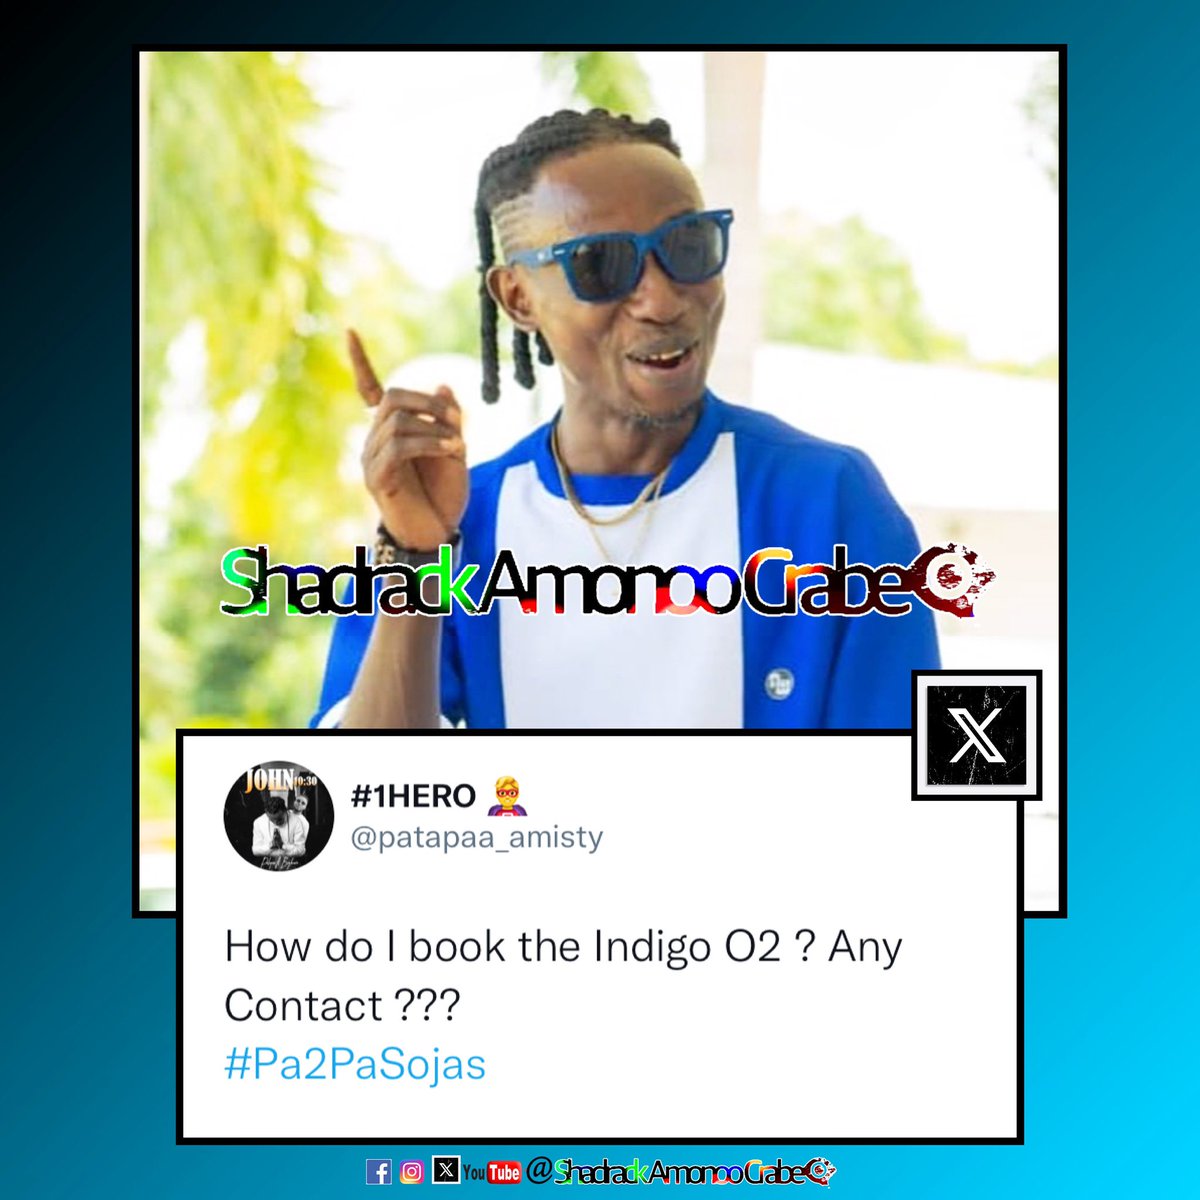 PATAPAA Want To Be The Next Ghanaian Artist To Fill The Indigo O2…

PA2PA Sojas Where Are You??
Your King About To Make History!!😬😬😬

#shadrackamonoocrabeupdates